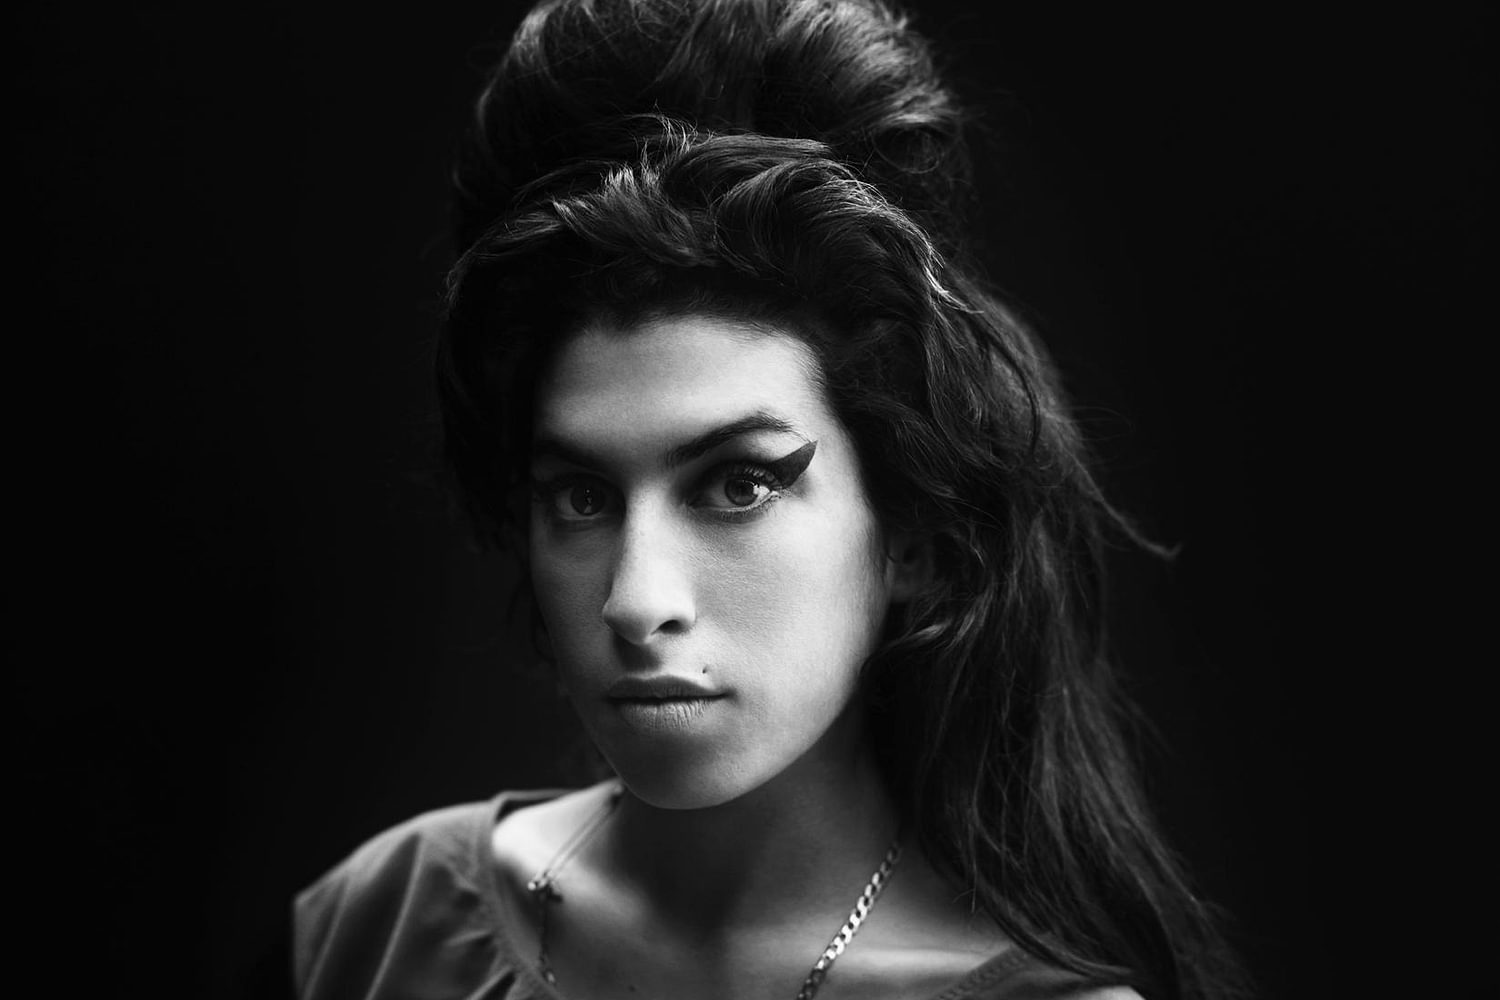 Amy Winehouse documentary to be shown at Cannes Festival